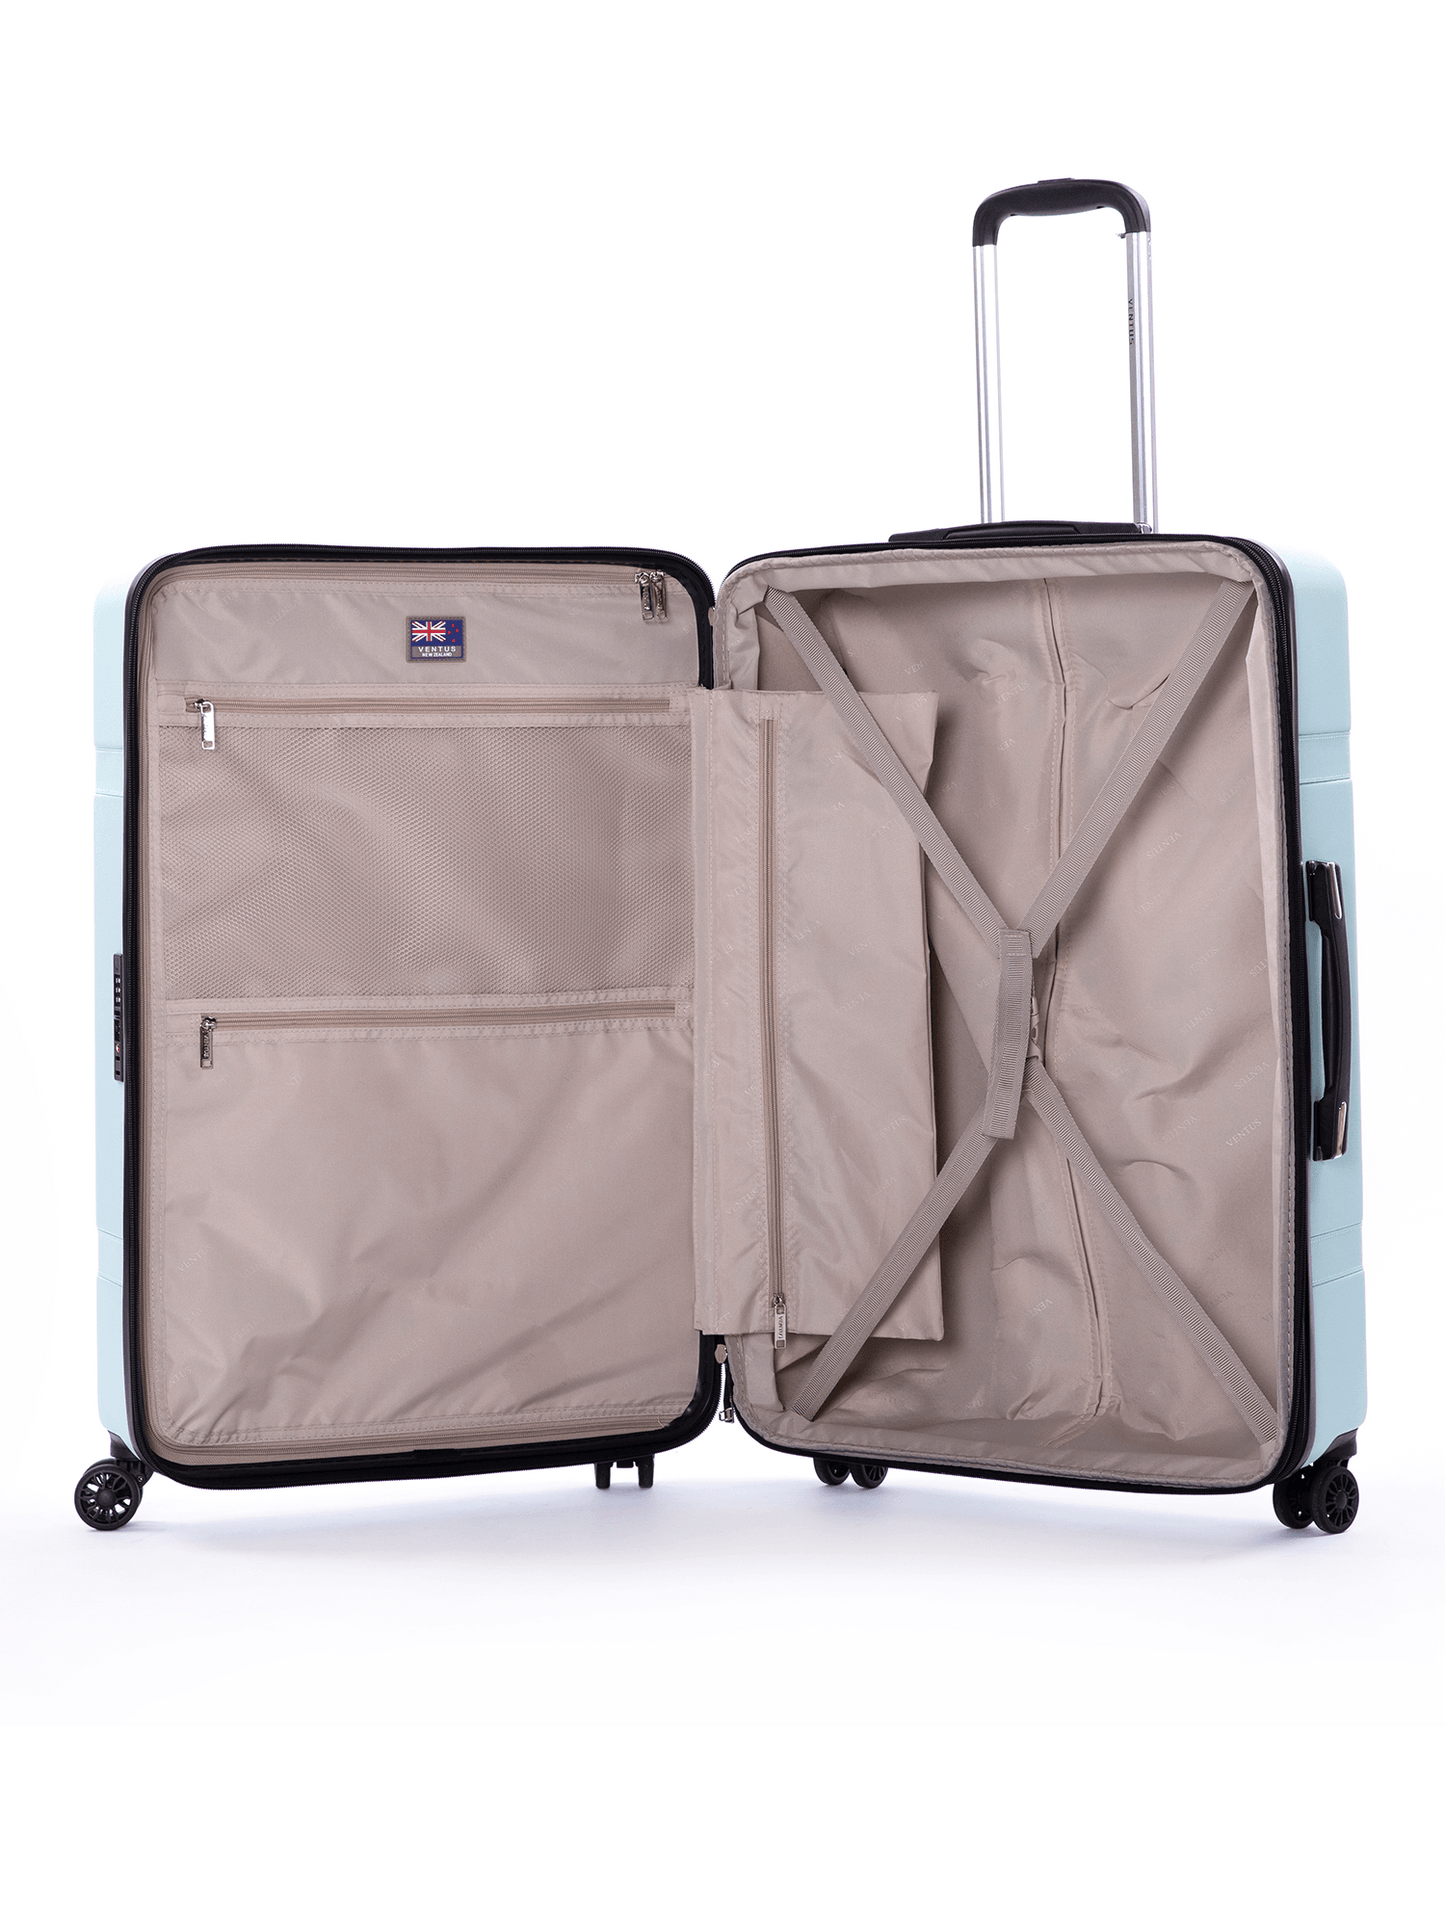 Ventus Strapped Spinner 77cm Suitcase - San Michelle Bags suitcase nz